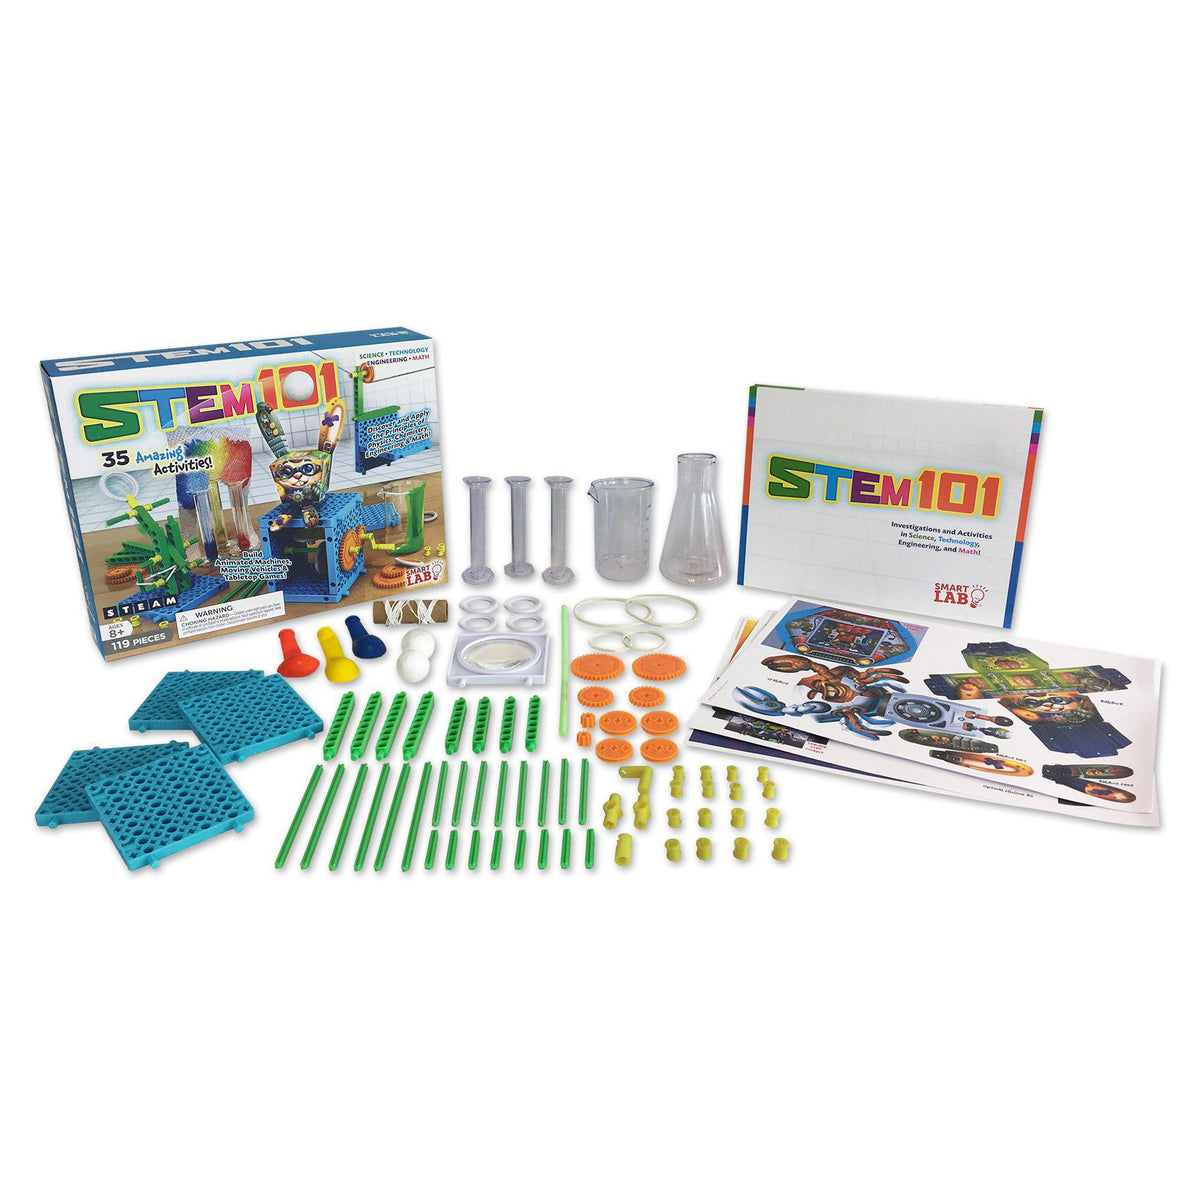 Front view of the STEM 101 box and all of the contents: boards, beakers, balloons, etc.